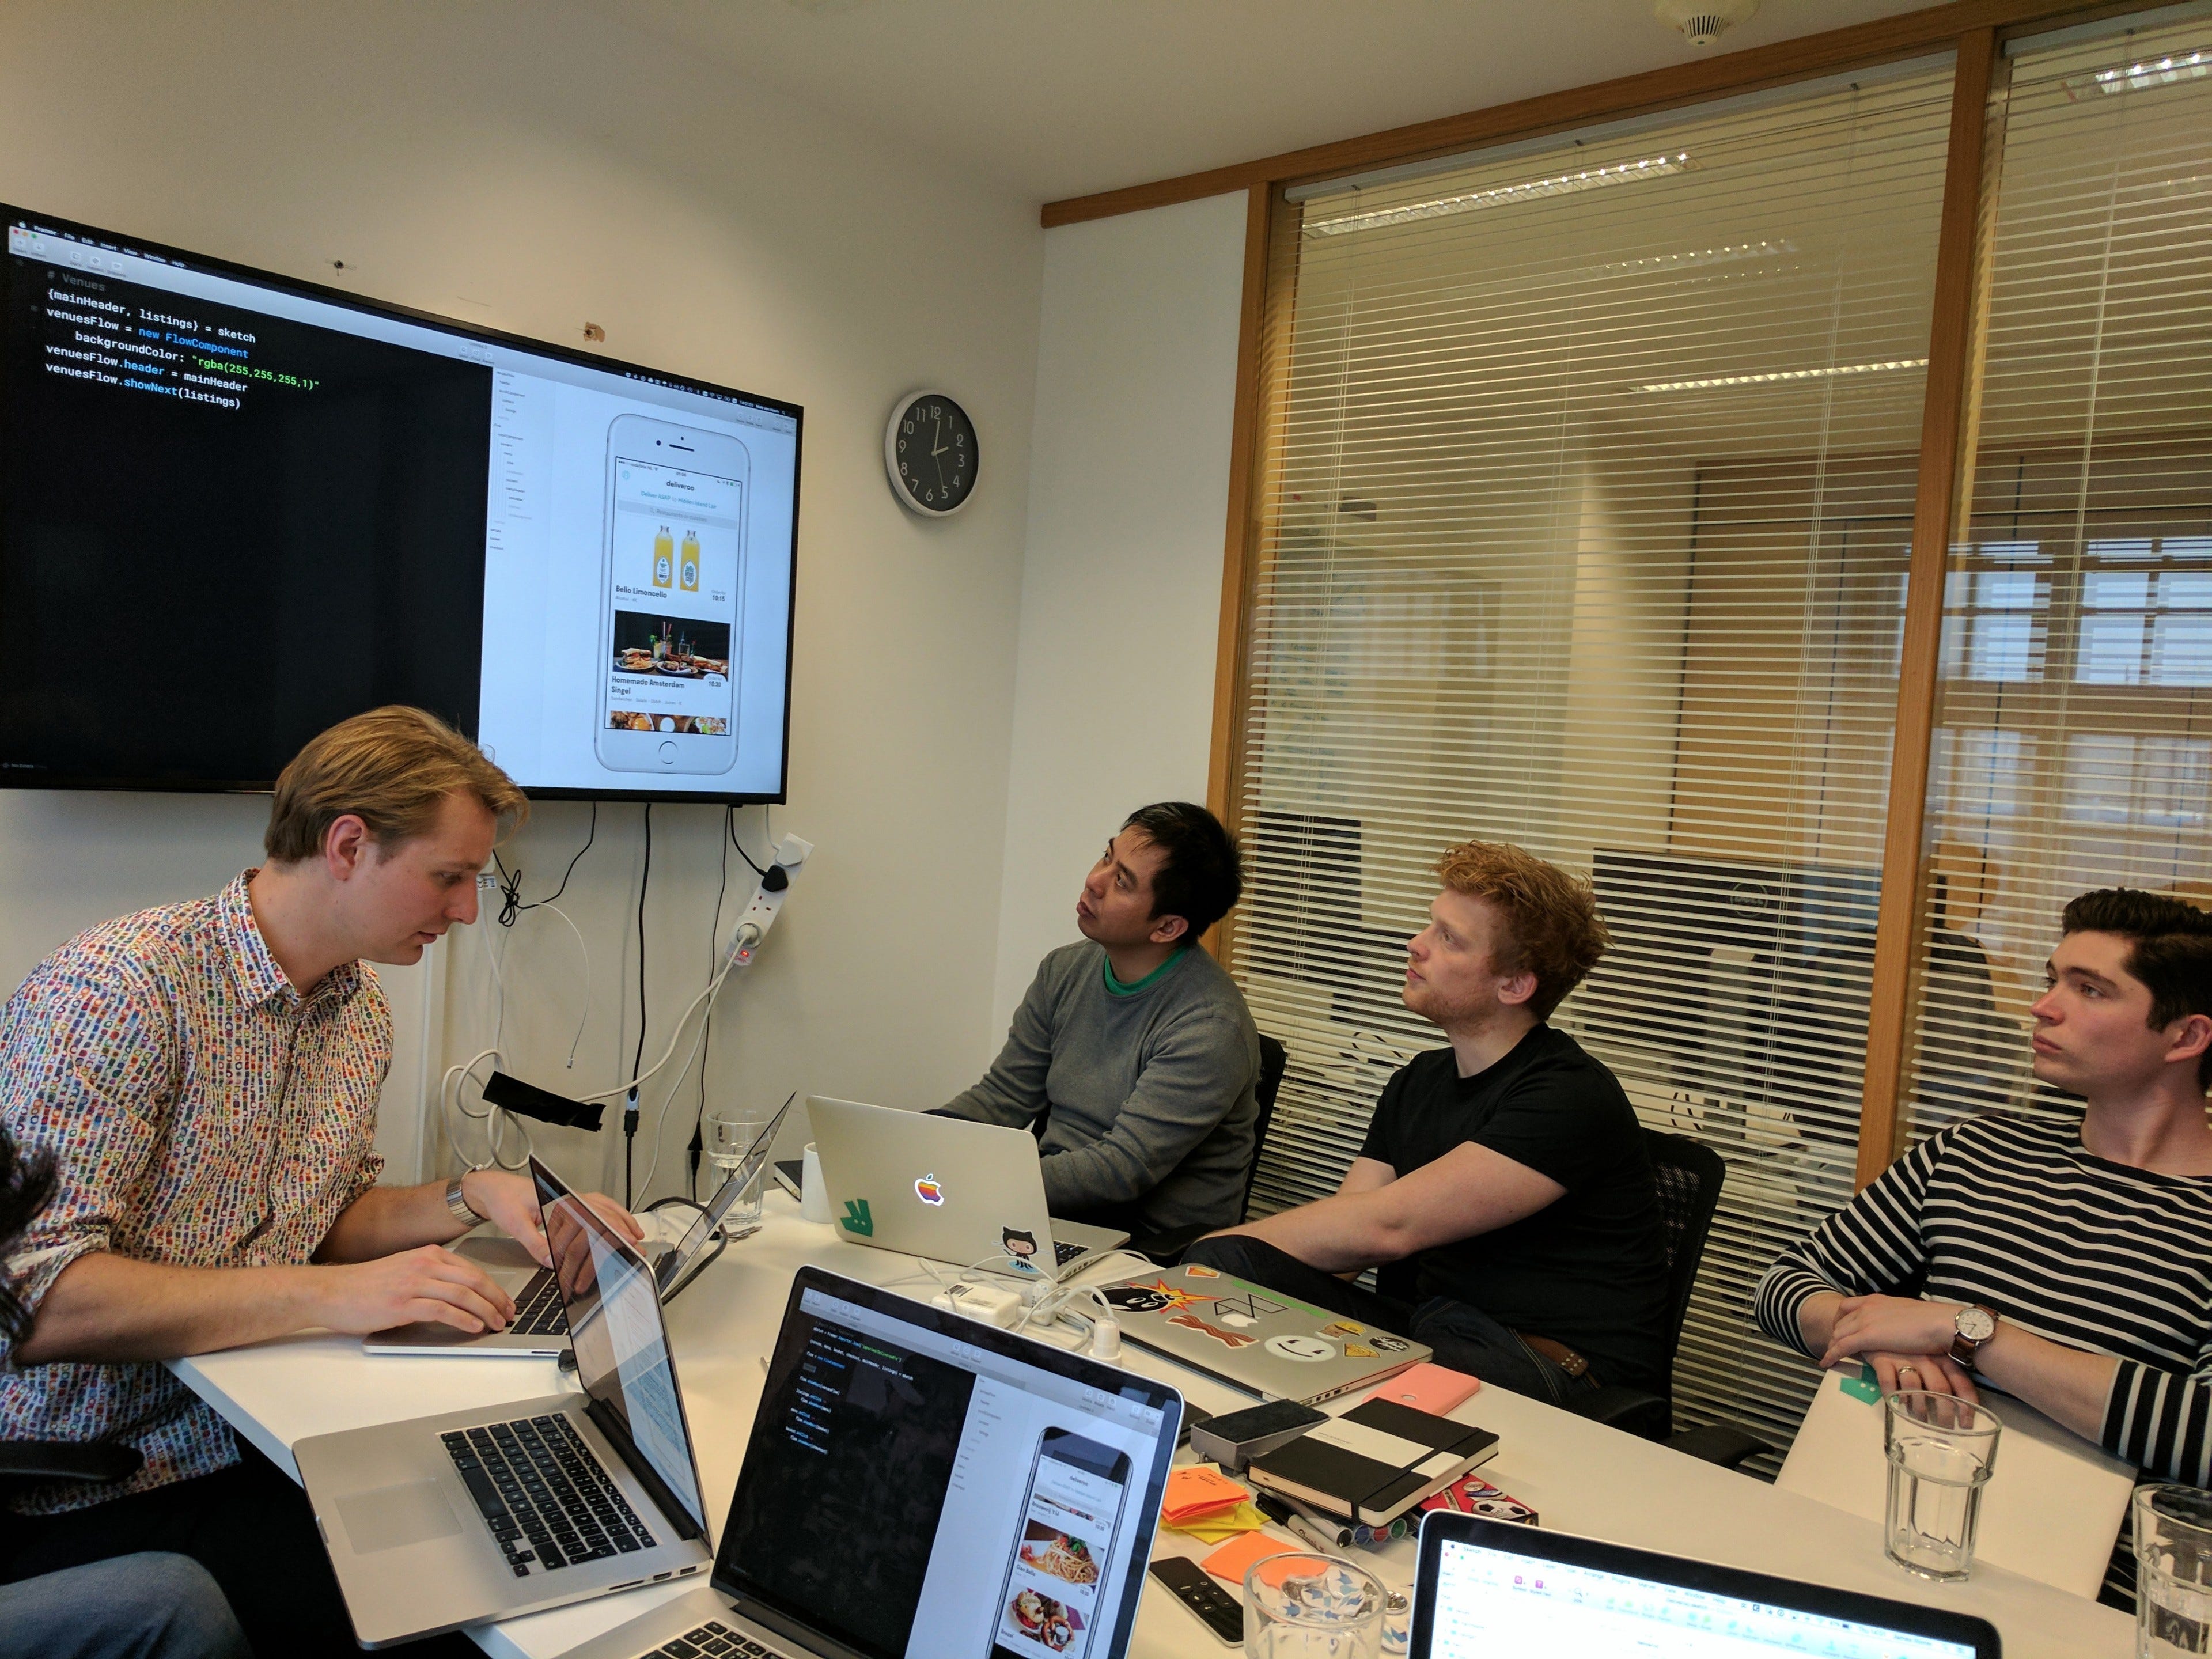 Our workshop with the Framer UX engineers